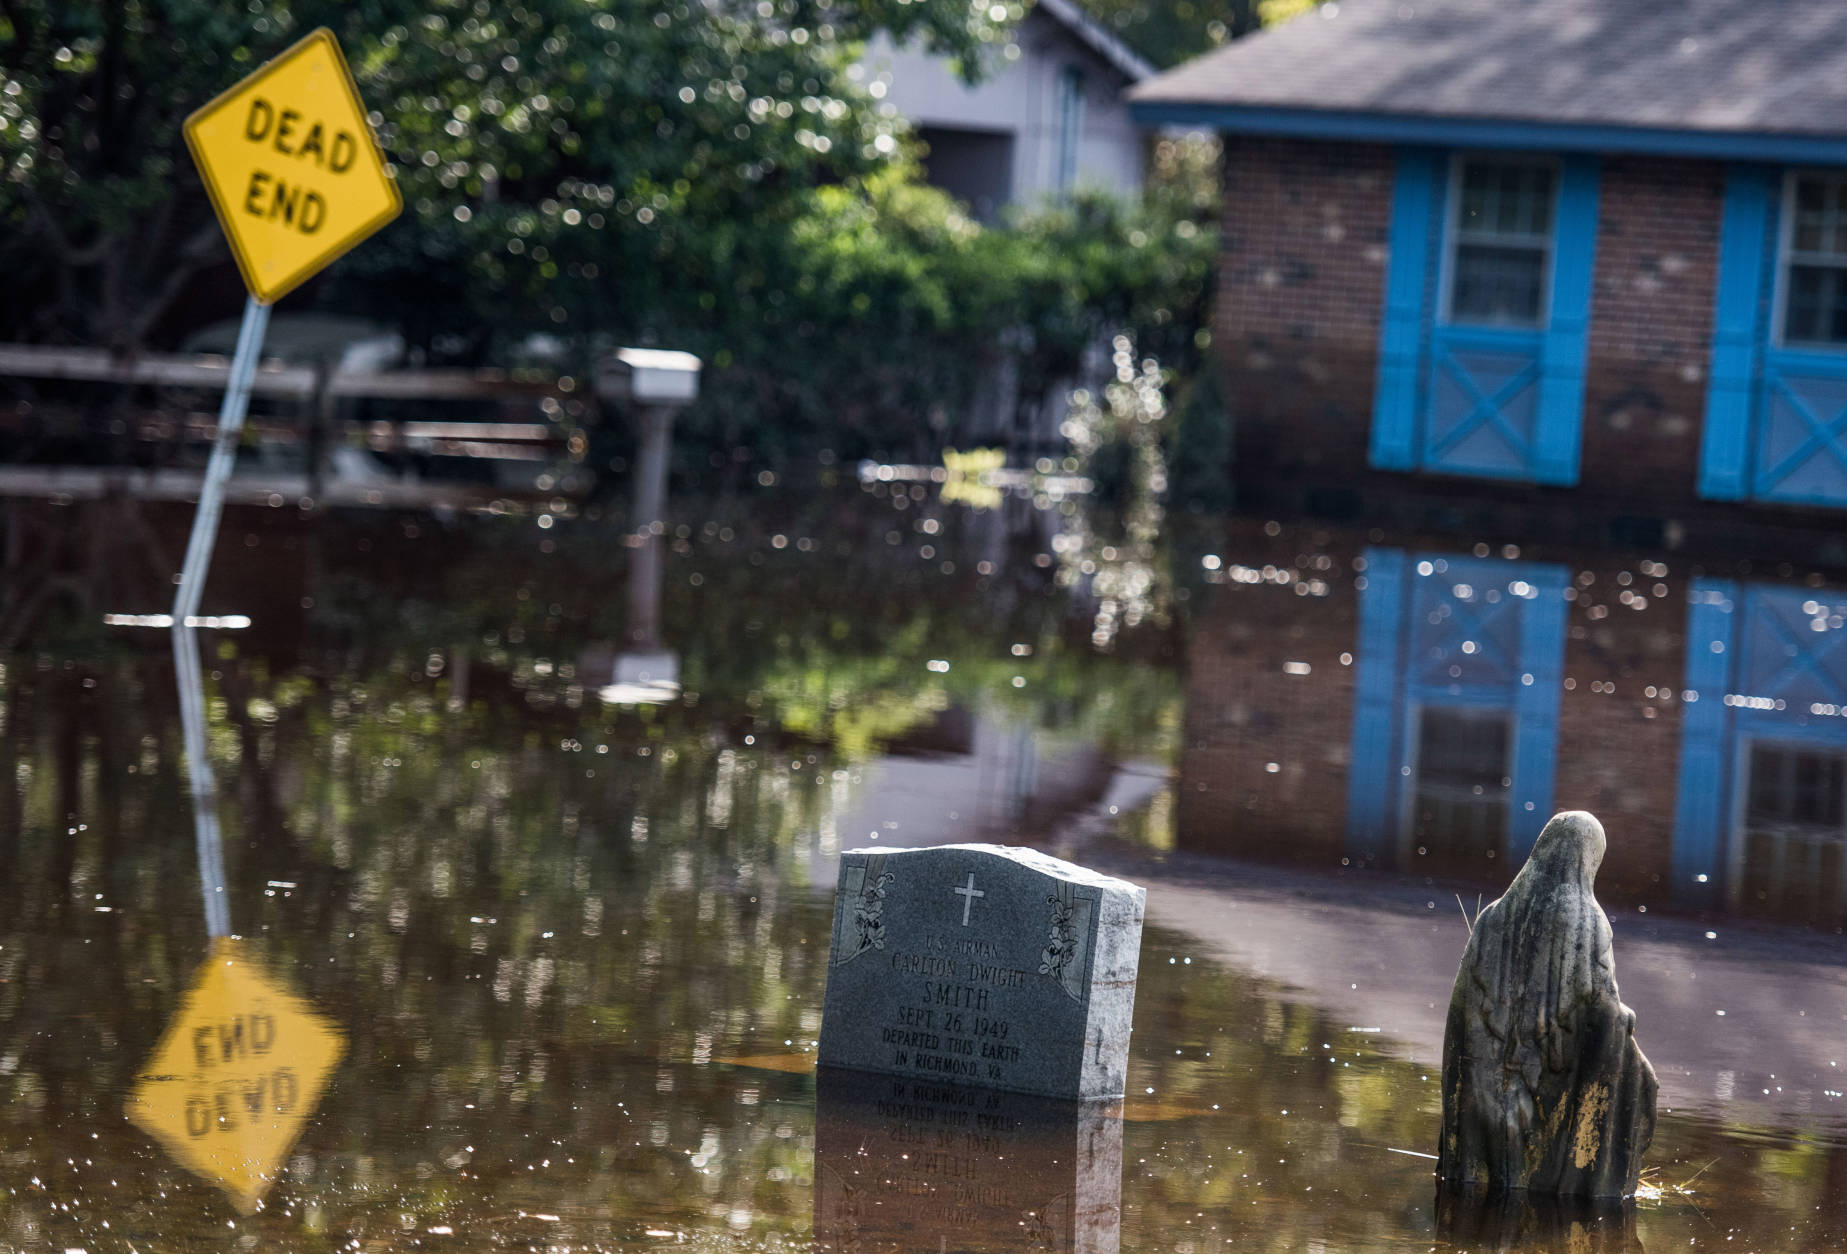 LUMBERTON, NC - OCTOBER 15: A graveyard is inundated with floodwaters from the Lumber River on October 15, 2016 in Lumberton, North Carolina. The flooding caused by Hurricane Matthew has been responsible for 26 deaths in the state. (Photo by Sean Rayford/Getty Images)